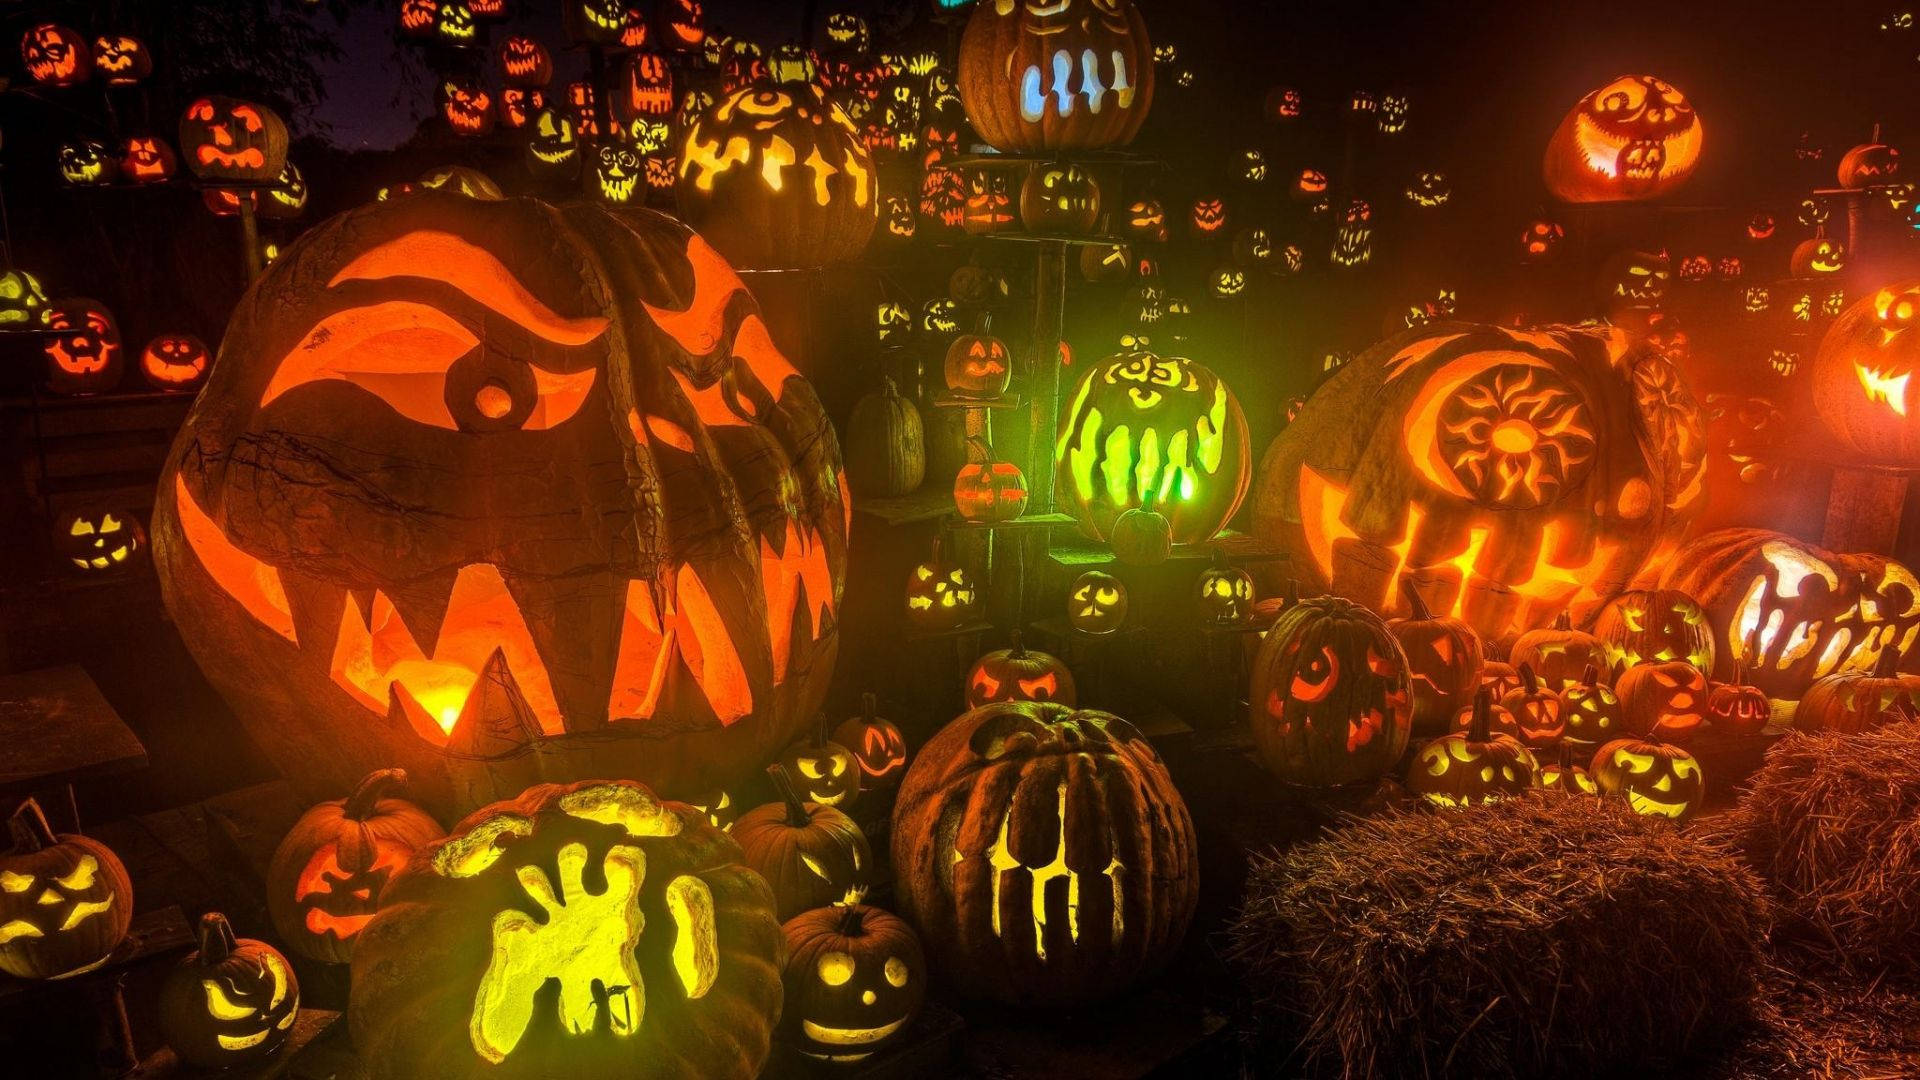 Download Scary Halloween Glowing Carved Pumpkins Wallpaper